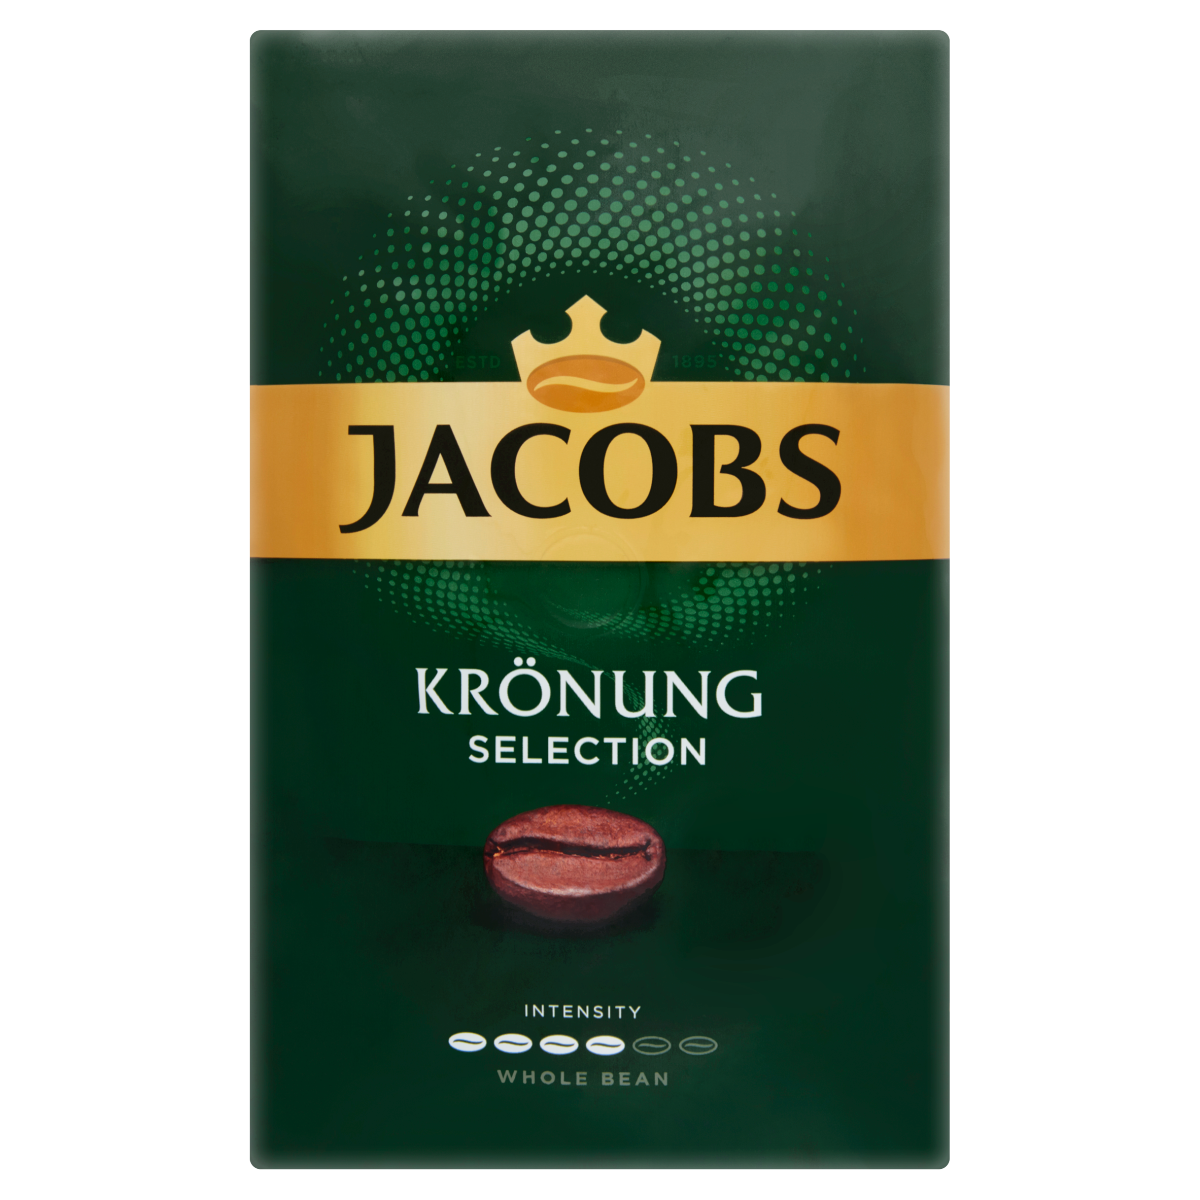 CAFEA BOABE JACOBS KRONUNG 1KG